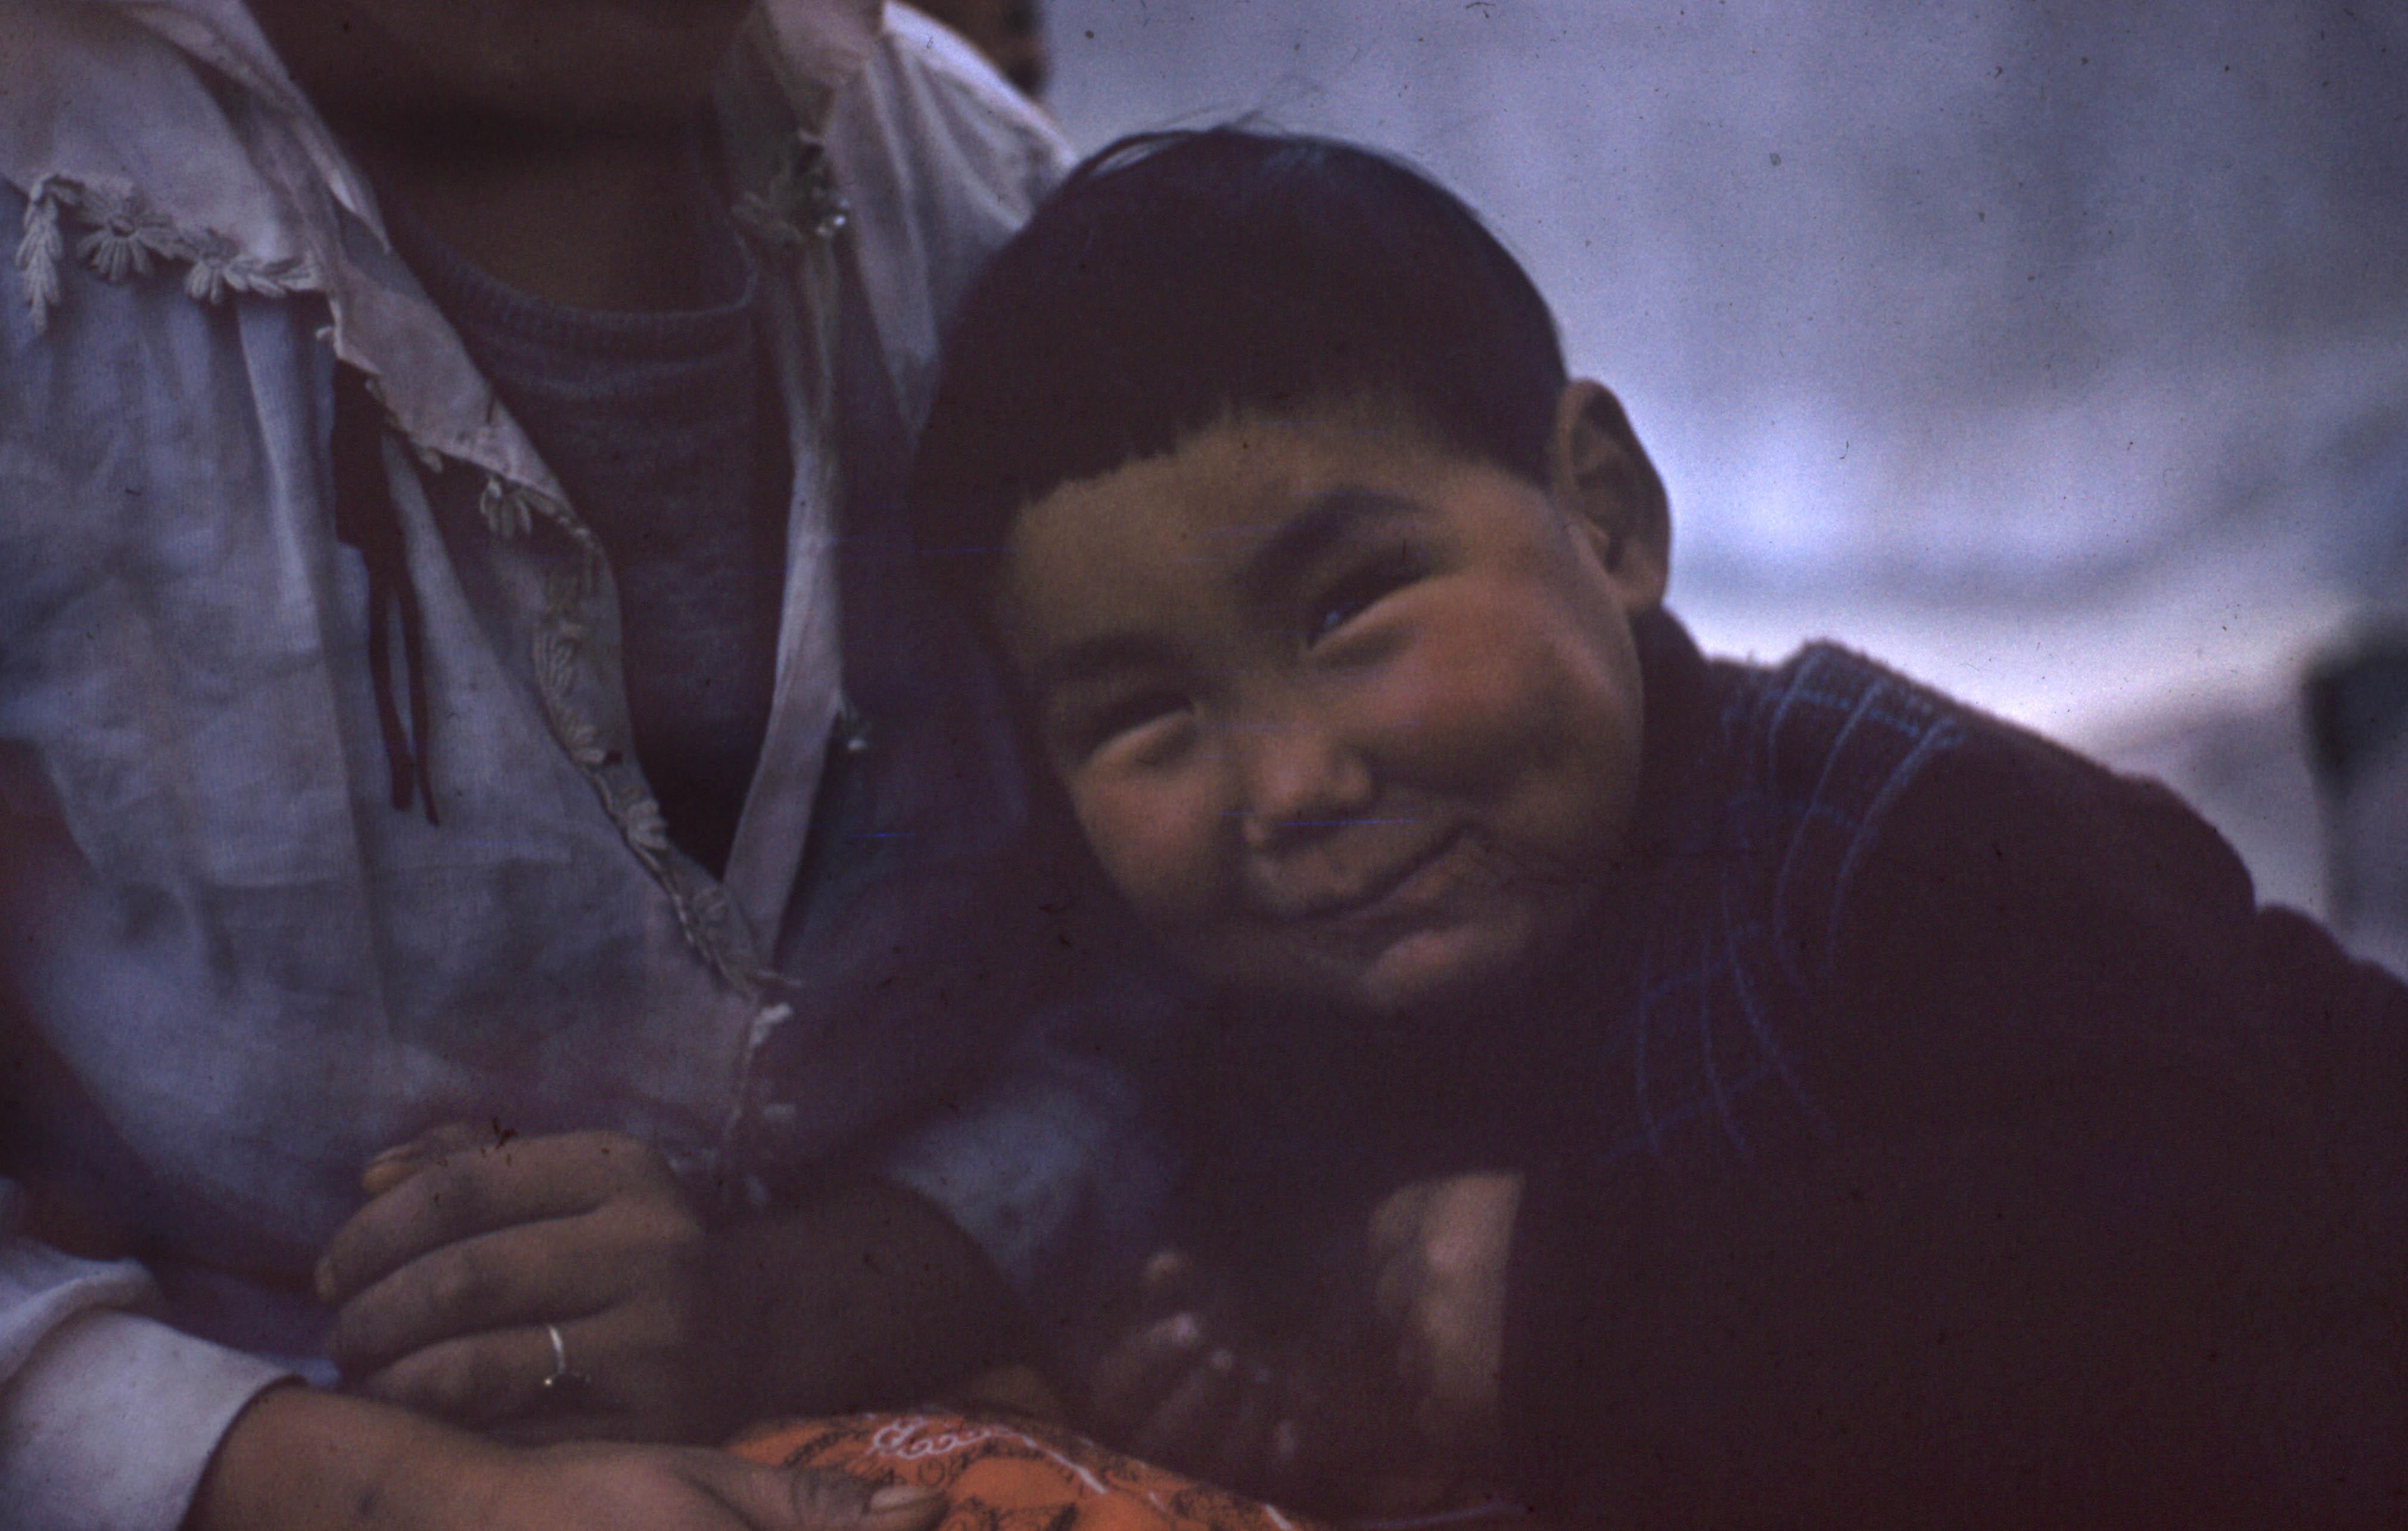 Kenojuak and her 3 year old son Anaco in Cape Dorset, 1960